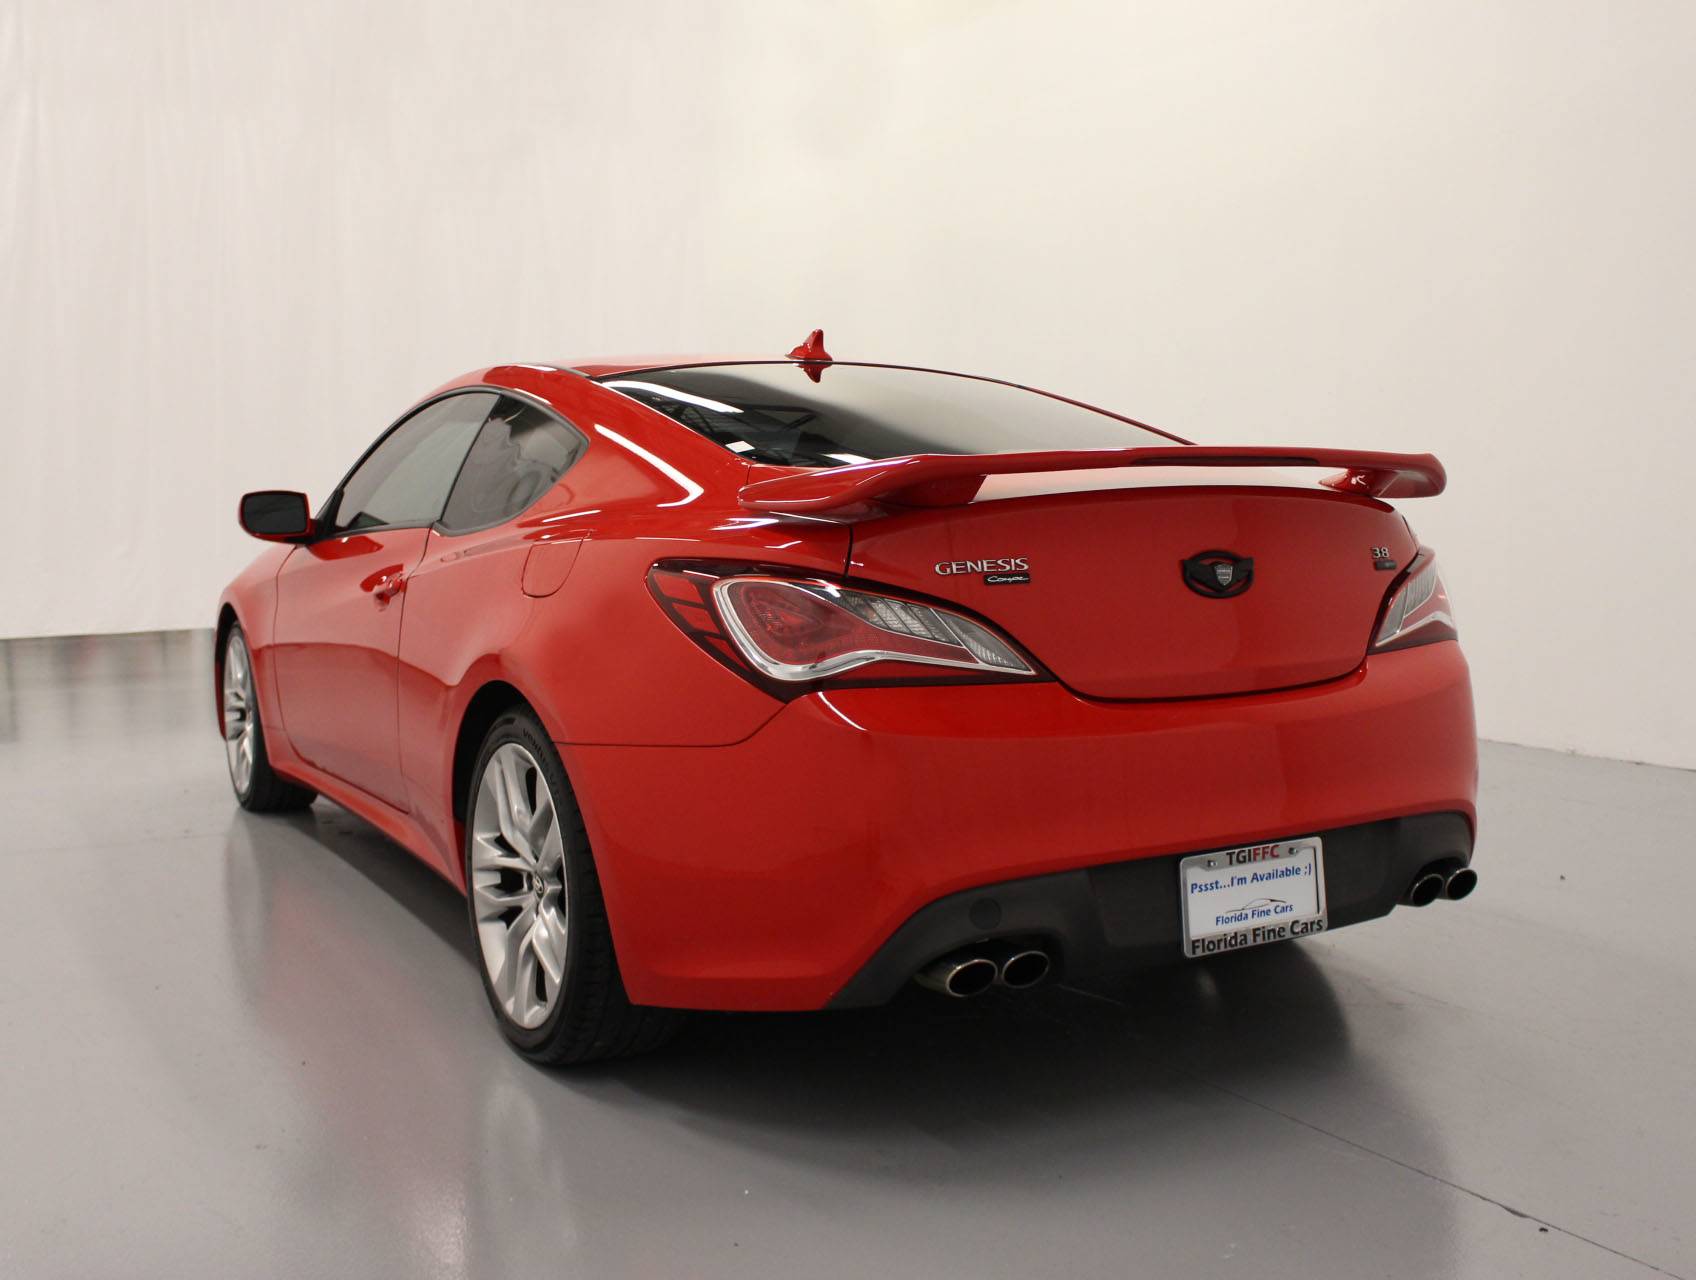 Used 2013 Hyundai Genesis Coupe 3 8 R Spec Coupe For Sale In